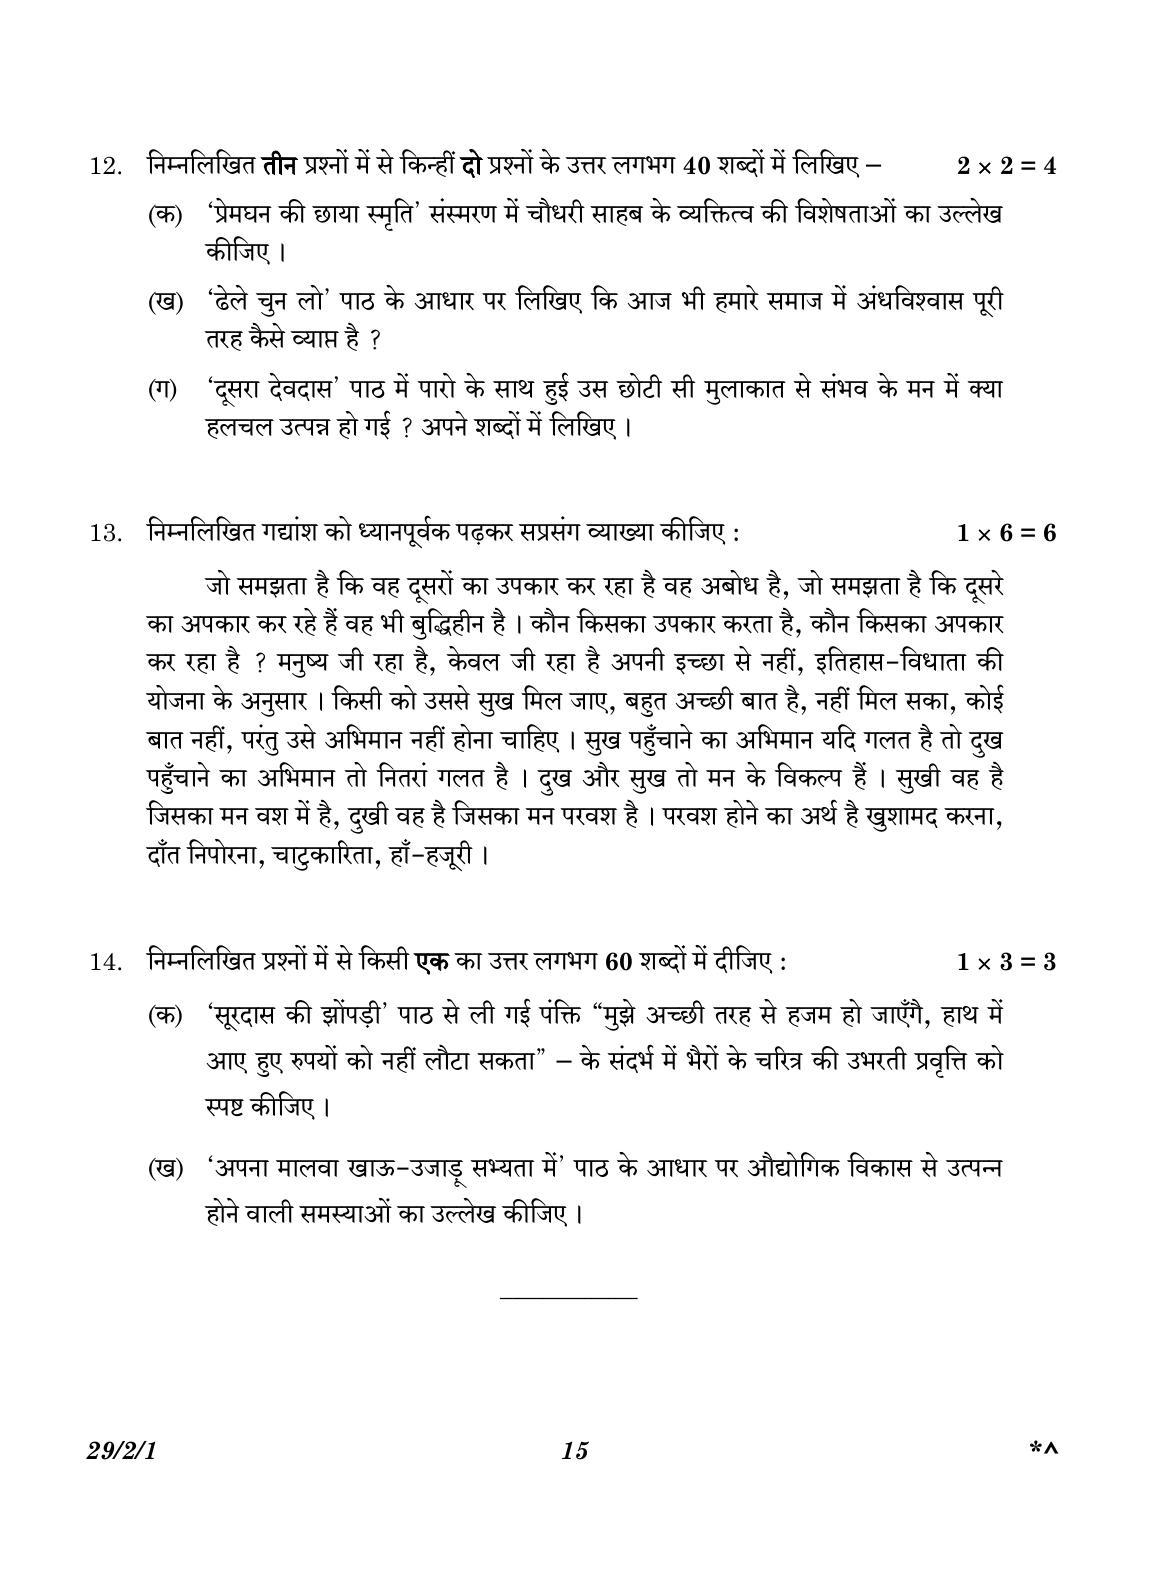 CBSE Class 12 29-2-1 Hindi Elective 2023 Question Paper - Page 15